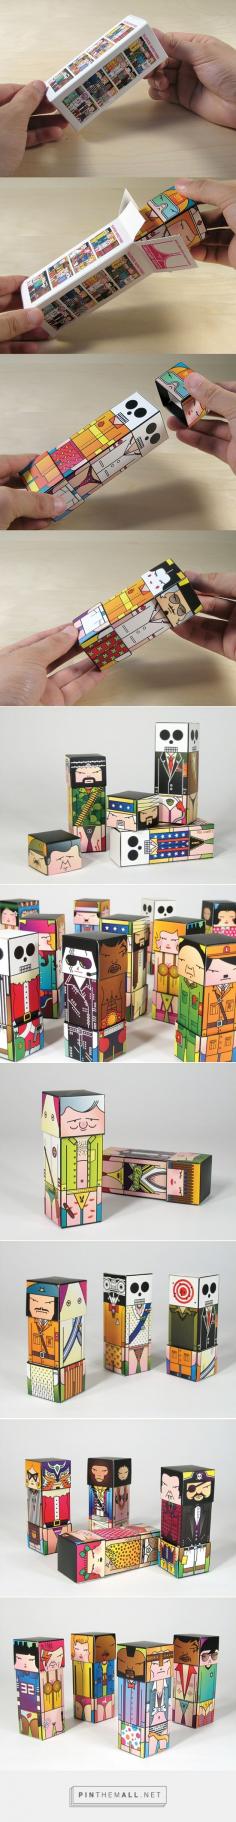 
                    
                        Super-Bastard Box Art Characters on Behance via undoboy curated by Packaging Diva PD. Super-Bastard Box Art Characters designed, illustrated concept packaging for their first designer toy : )
                    
                